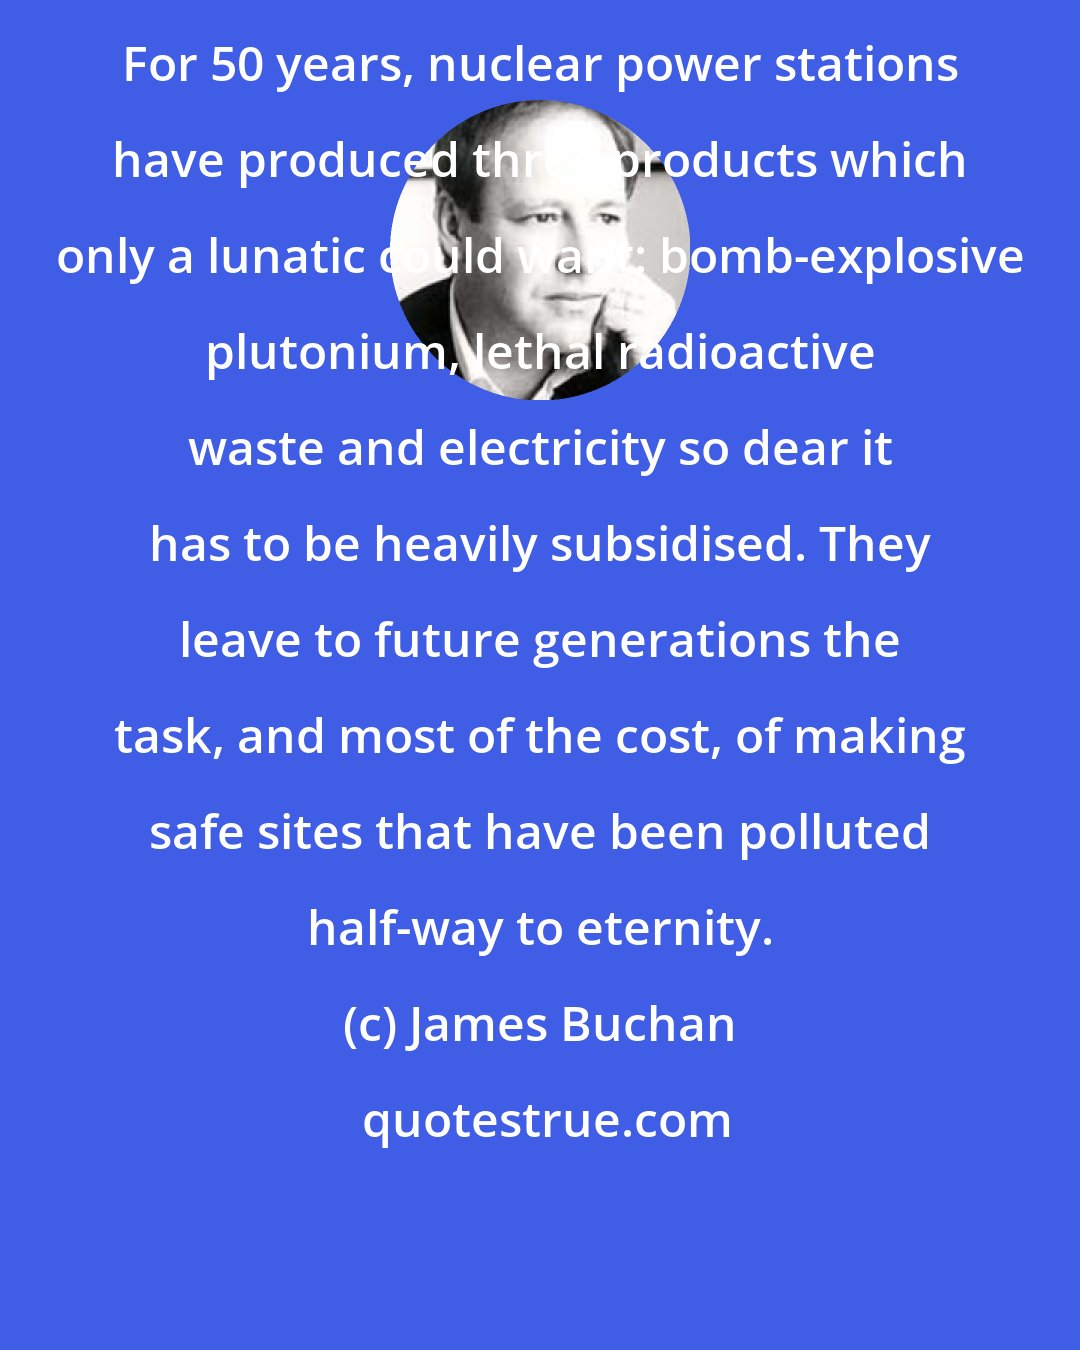 James Buchan: For 50 years, nuclear power stations have produced three products which only a lunatic could want: bomb-explosive plutonium, lethal radioactive waste and electricity so dear it has to be heavily subsidised. They leave to future generations the task, and most of the cost, of making safe sites that have been polluted half-way to eternity.